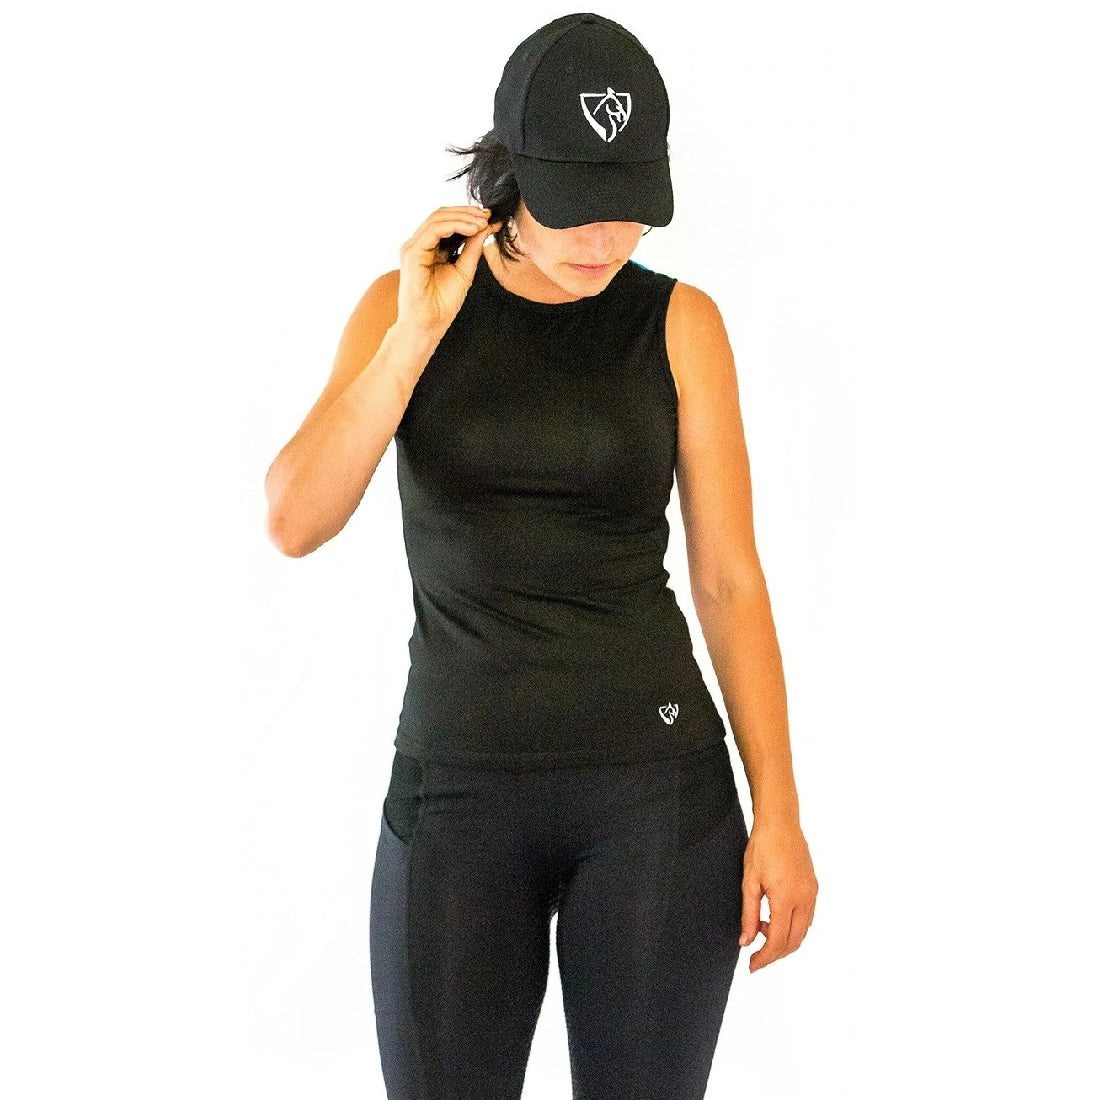 Woman in black cap and horse riding tights standing against white background.